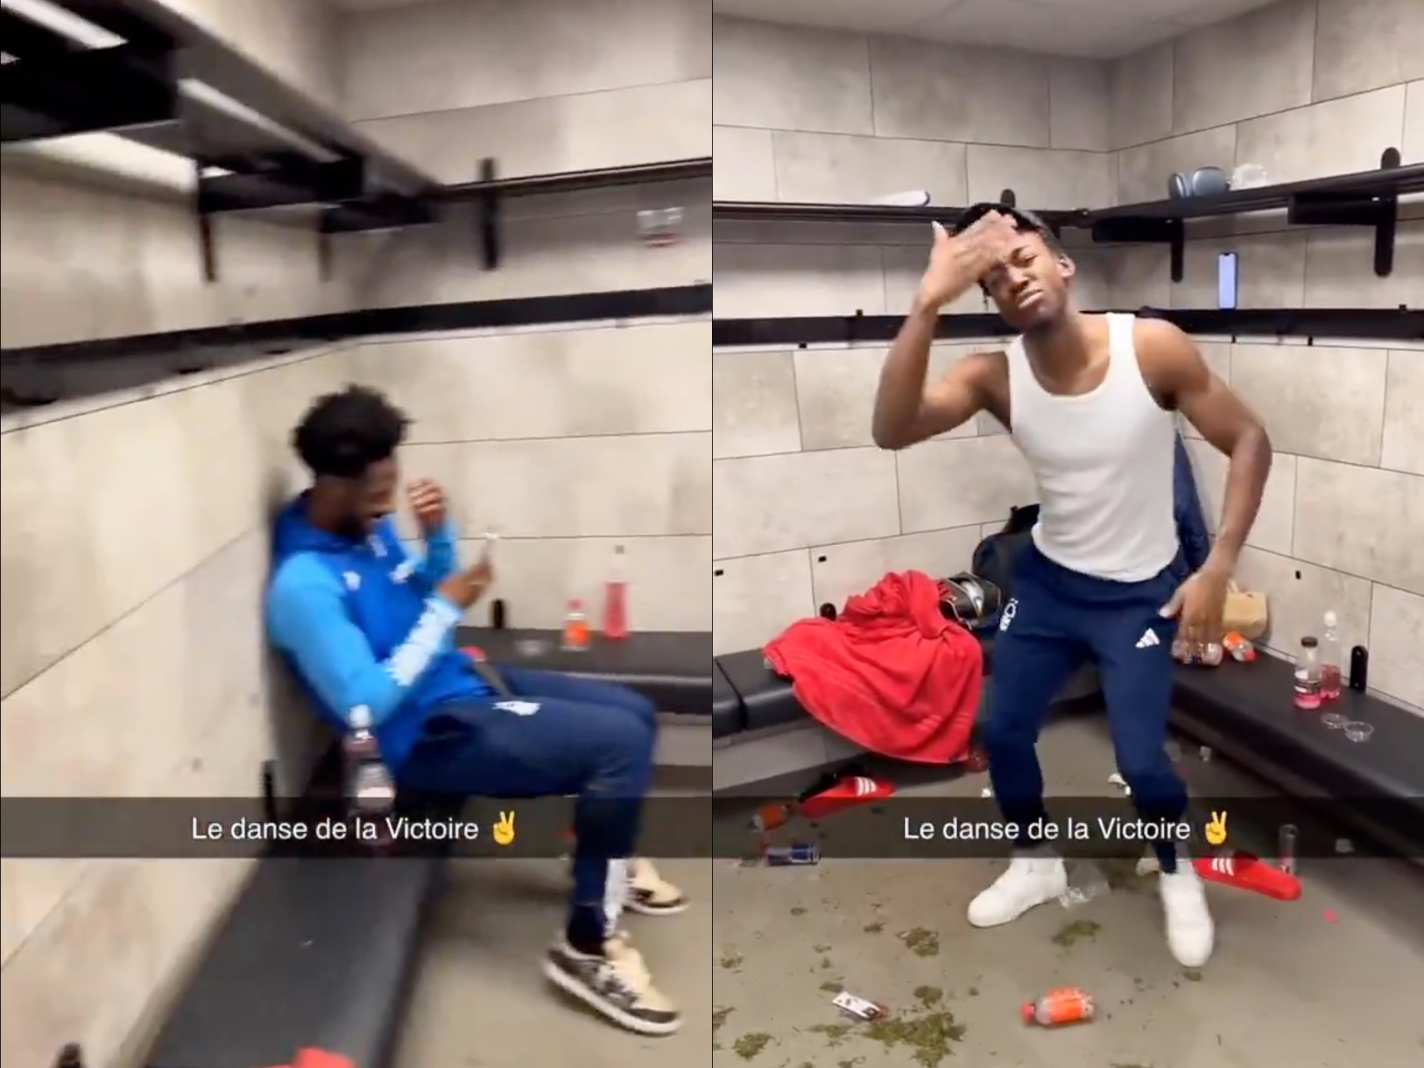 Anthony Elanga's video shows the 'prison cell' type away dressing room at St. James' Park